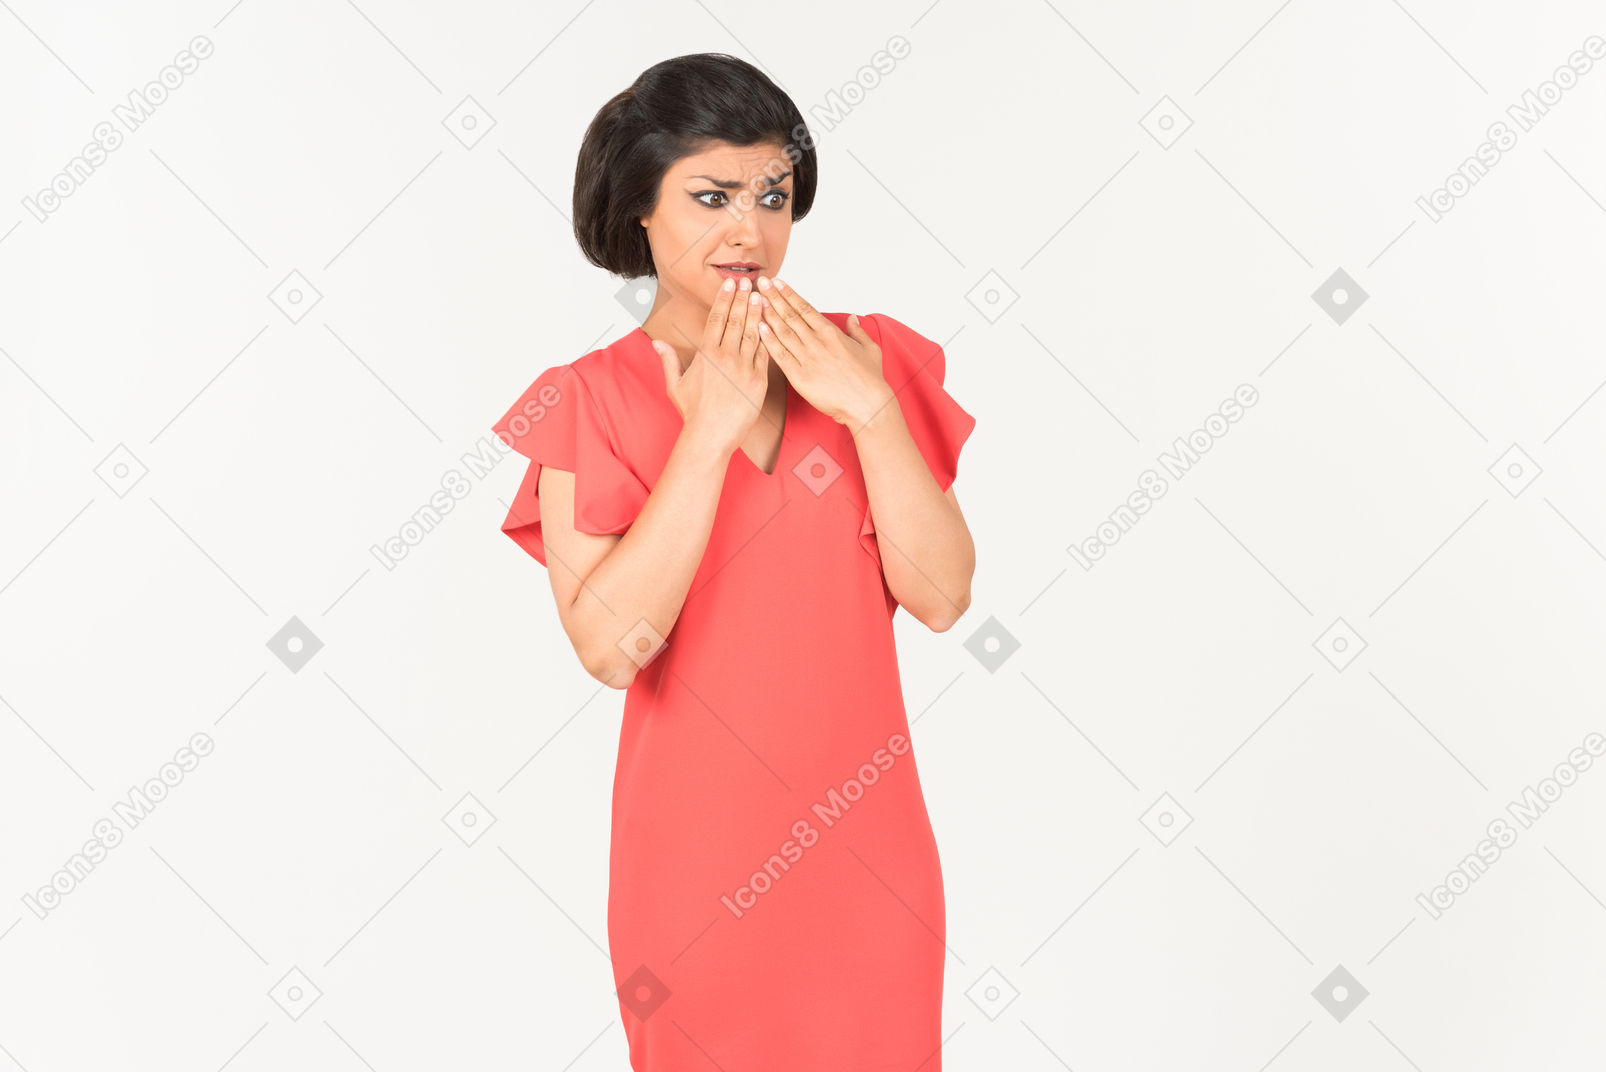 Slightly shocked looking young indian woman almost closing her mouth with hands